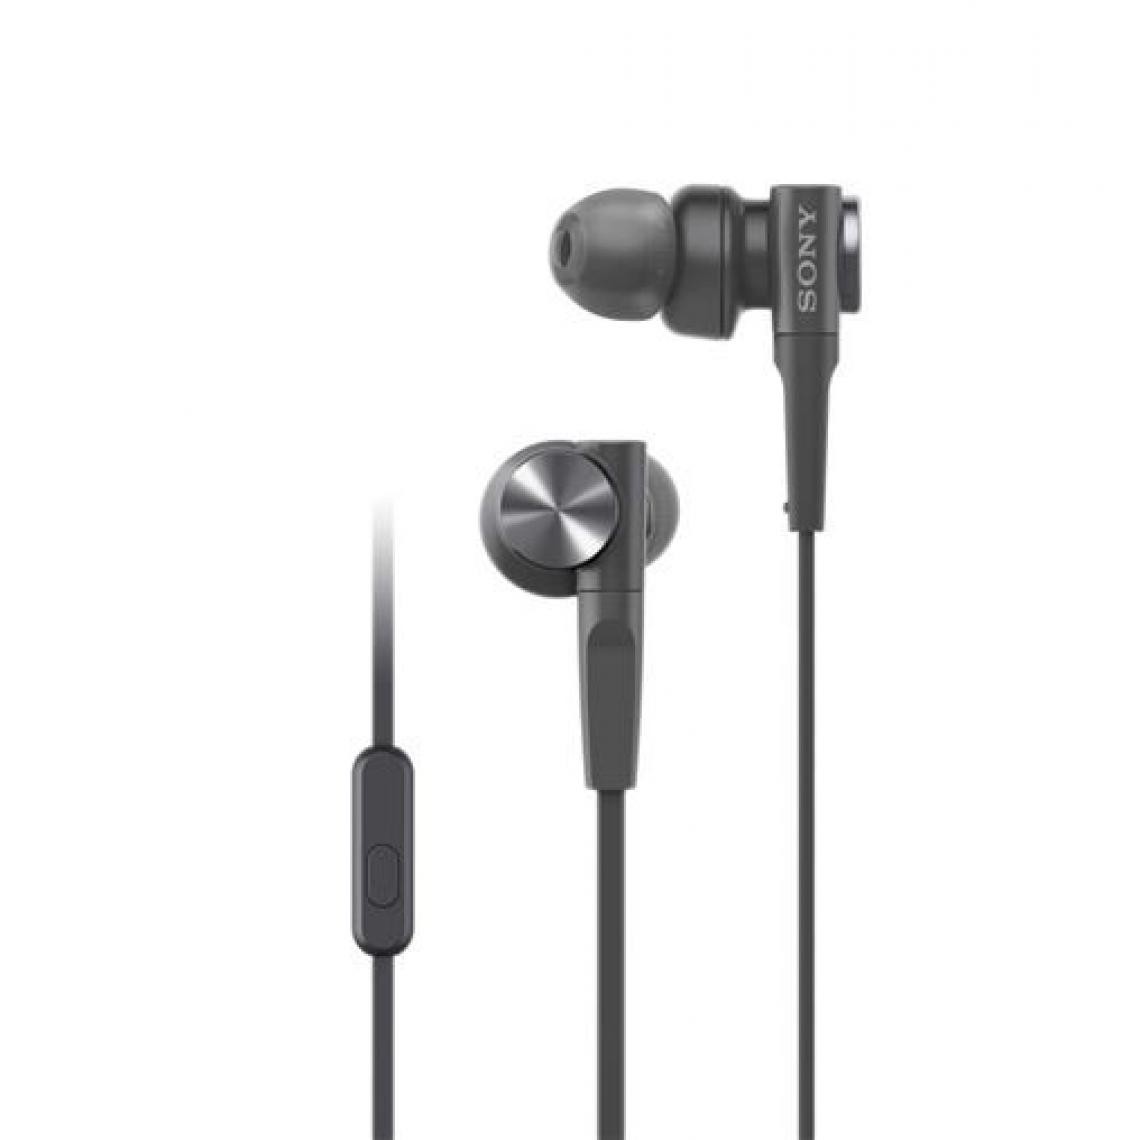 Sony - Ecouteurs intra auriculaires filaires Sony MDR XB50AP Noir - Ecouteurs intra-auriculaires